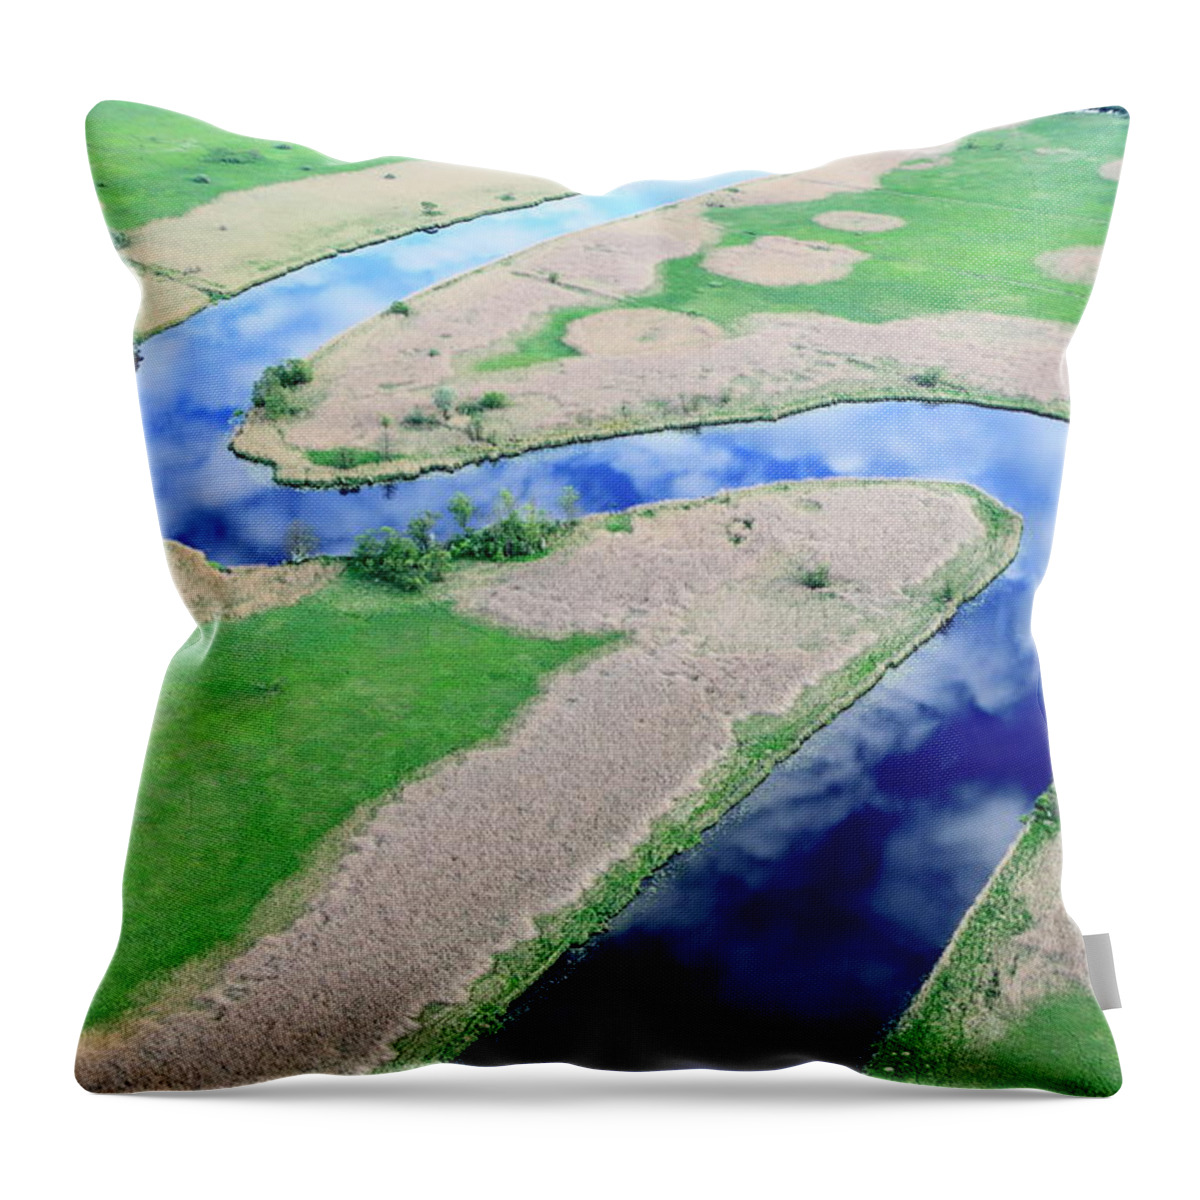 Curve Throw Pillow featuring the photograph Aerial Photo Of A River #1 by Dariuszpa